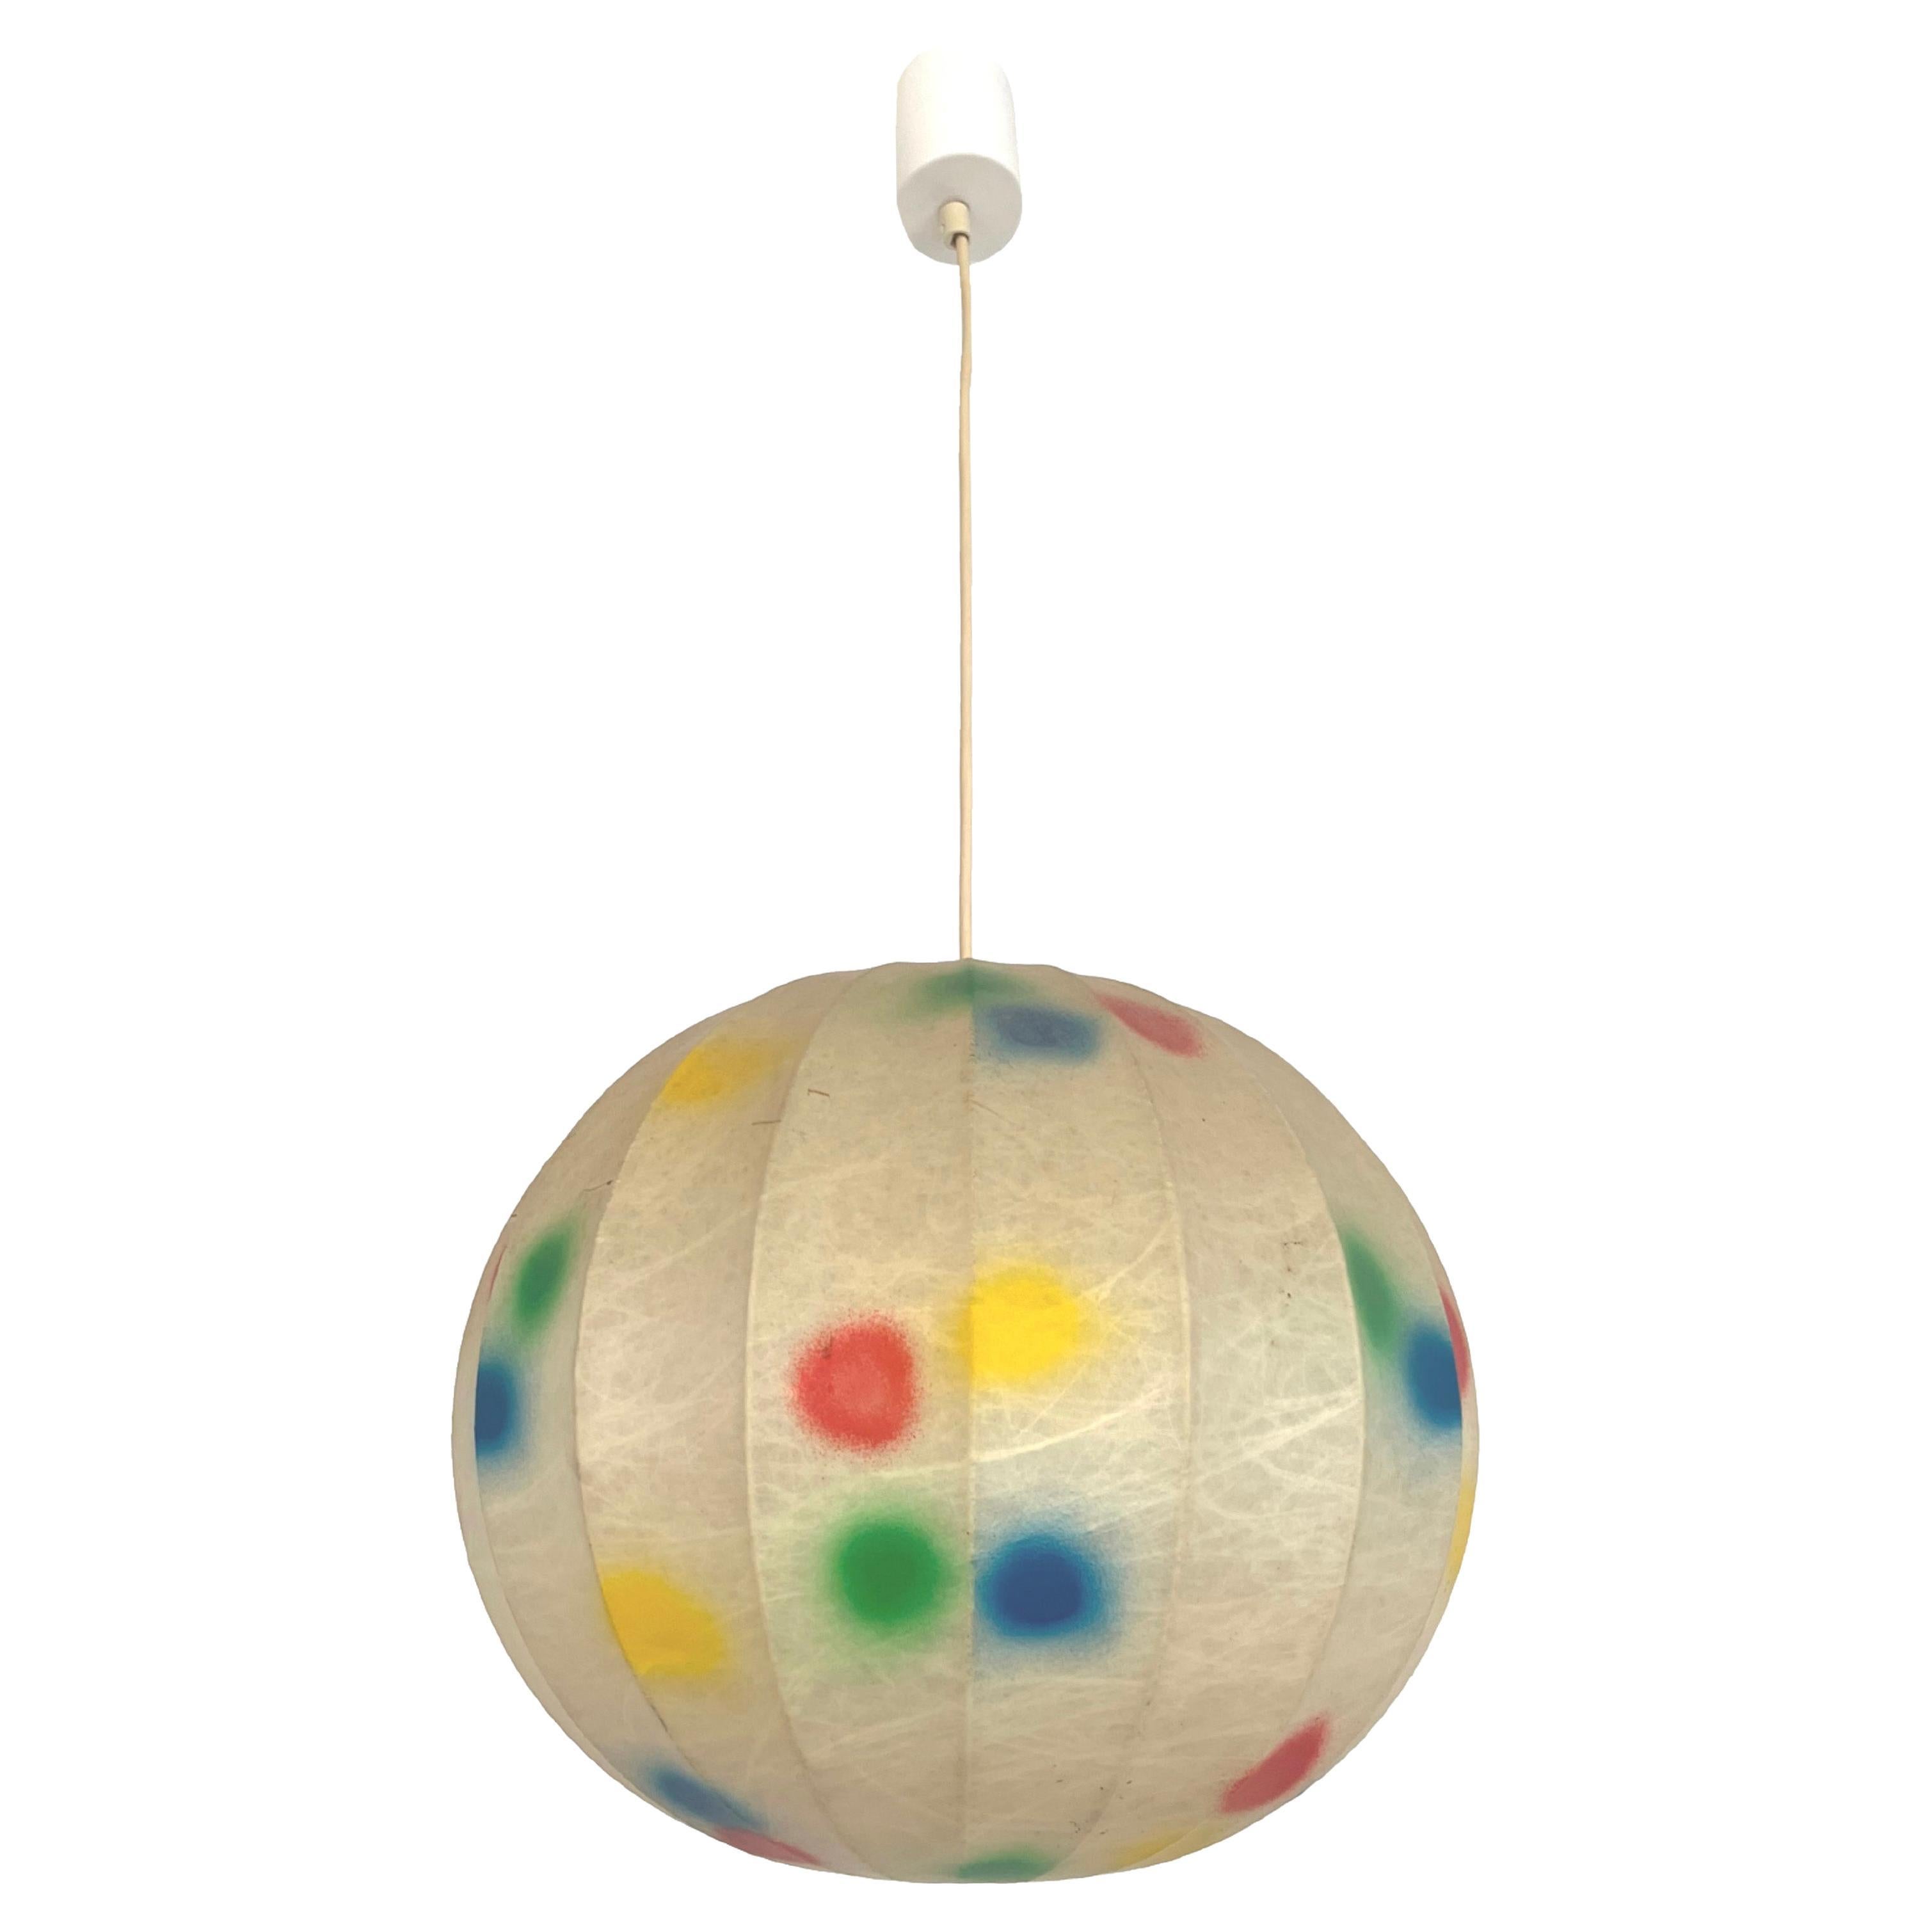 Italian Mid-century Cocoon Colorful Chandelier by "Cocoon crèation", 1970s For Sale